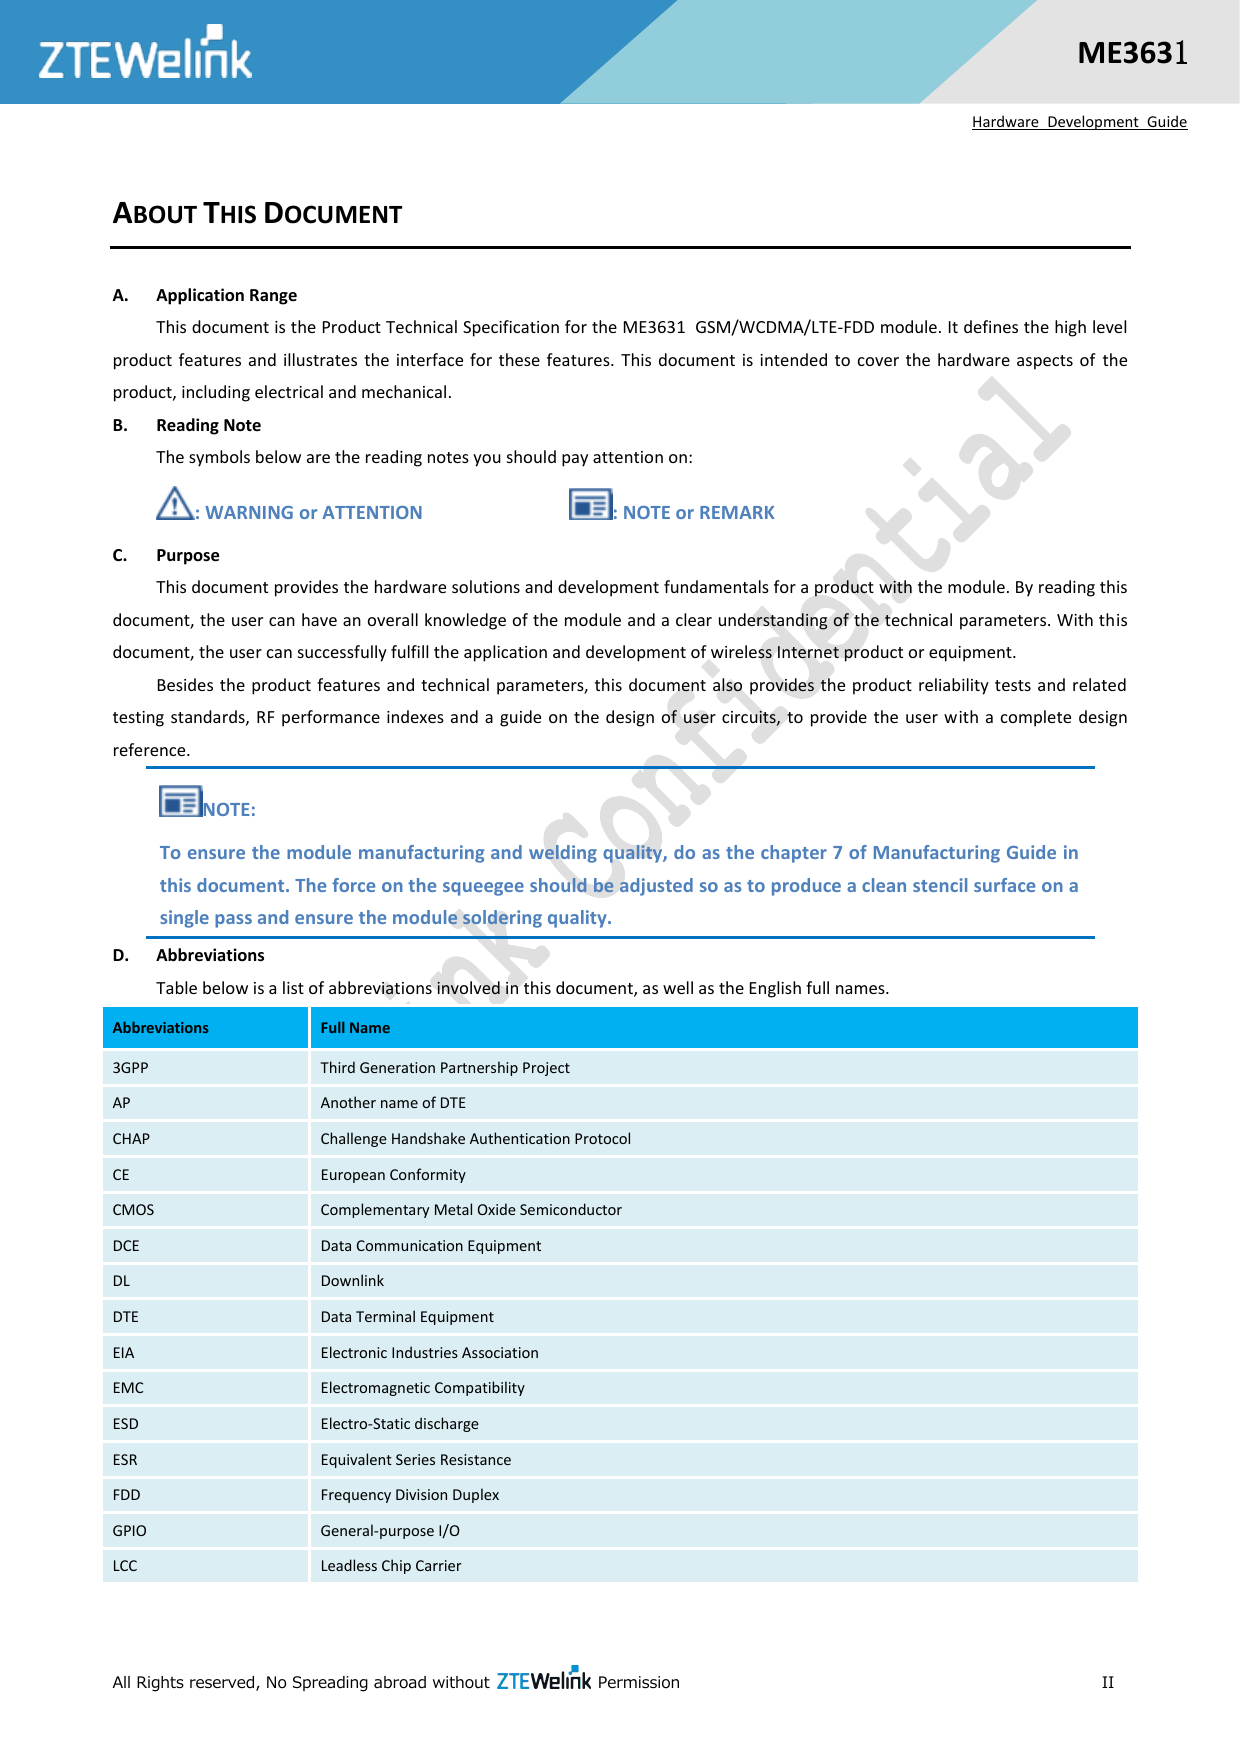  All Rights reserved, No Spreading abroad without   Permission                                                      II  ME3631  Hardware  Development  Guide ABOUT THIS DOCUMENT A. Application Range This document is the Product Technical Specification for the ME3631 GSM/WCDMA/LTE-FDD module. It defines the high level product features and illustrates  the interface for these features. This document is  intended  to cover  the  hardware  aspects of  the product, including electrical and mechanical. B. Reading Note The symbols below are the reading notes you should pay attention on: : WARNING or ATTENTION                            : NOTE or REMARK C. Purpose This document provides the hardware solutions and development fundamentals for a product with the module. By reading this document, the user can have an overall knowledge of the module and a clear understanding of the technical parameters. With this document, the user can successfully fulfill the application and development of wireless Internet product or equipment. Besides the product features and technical parameters, this document also provides the product reliability tests and related testing standards, RF performance indexes and a guide on the  design of  user circuits,  to  provide  the  user with a complete design reference.   NOTE: To ensure the module manufacturing and welding quality, do as the chapter 7 of Manufacturing Guide in this document. The force on the squeegee should be adjusted so as to produce a clean stencil surface on a single pass and ensure the module soldering quality. D. Abbreviations Table below is a list of abbreviations involved in this document, as well as the English full names. Abbreviations Full Name 3GPP Third Generation Partnership Project AP Another name of DTE CHAP Challenge Handshake Authentication Protocol CE European Conformity CMOS Complementary Metal Oxide Semiconductor DCE Data Communication Equipment DL Downlink DTE Data Terminal Equipment EIA Electronic Industries Association EMC Electromagnetic Compatibility ESD Electro-Static discharge ESR Equivalent Series Resistance FDD Frequency Division Duplex GPIO General-purpose I/O LCC Leadless Chip Carrier 